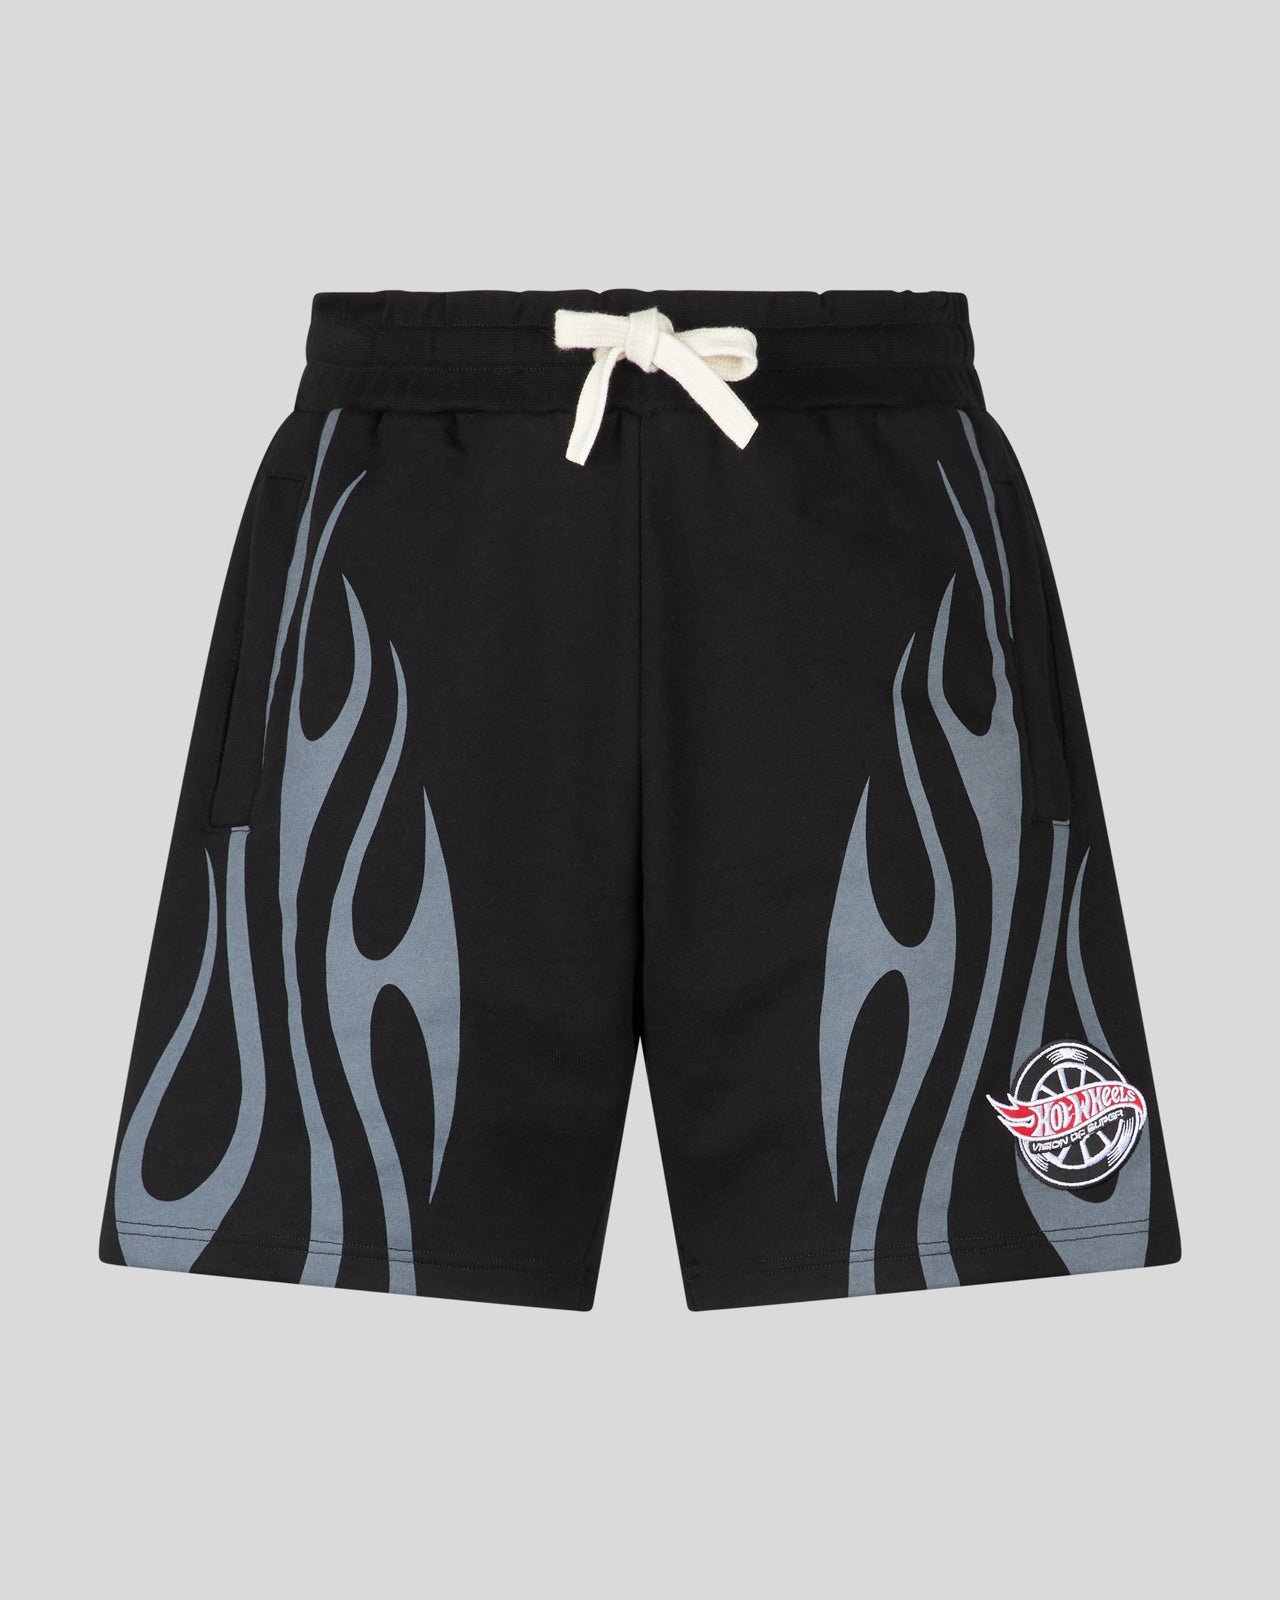 BLACK SHORTS WITH FLAMES AND COLLAB LOGO